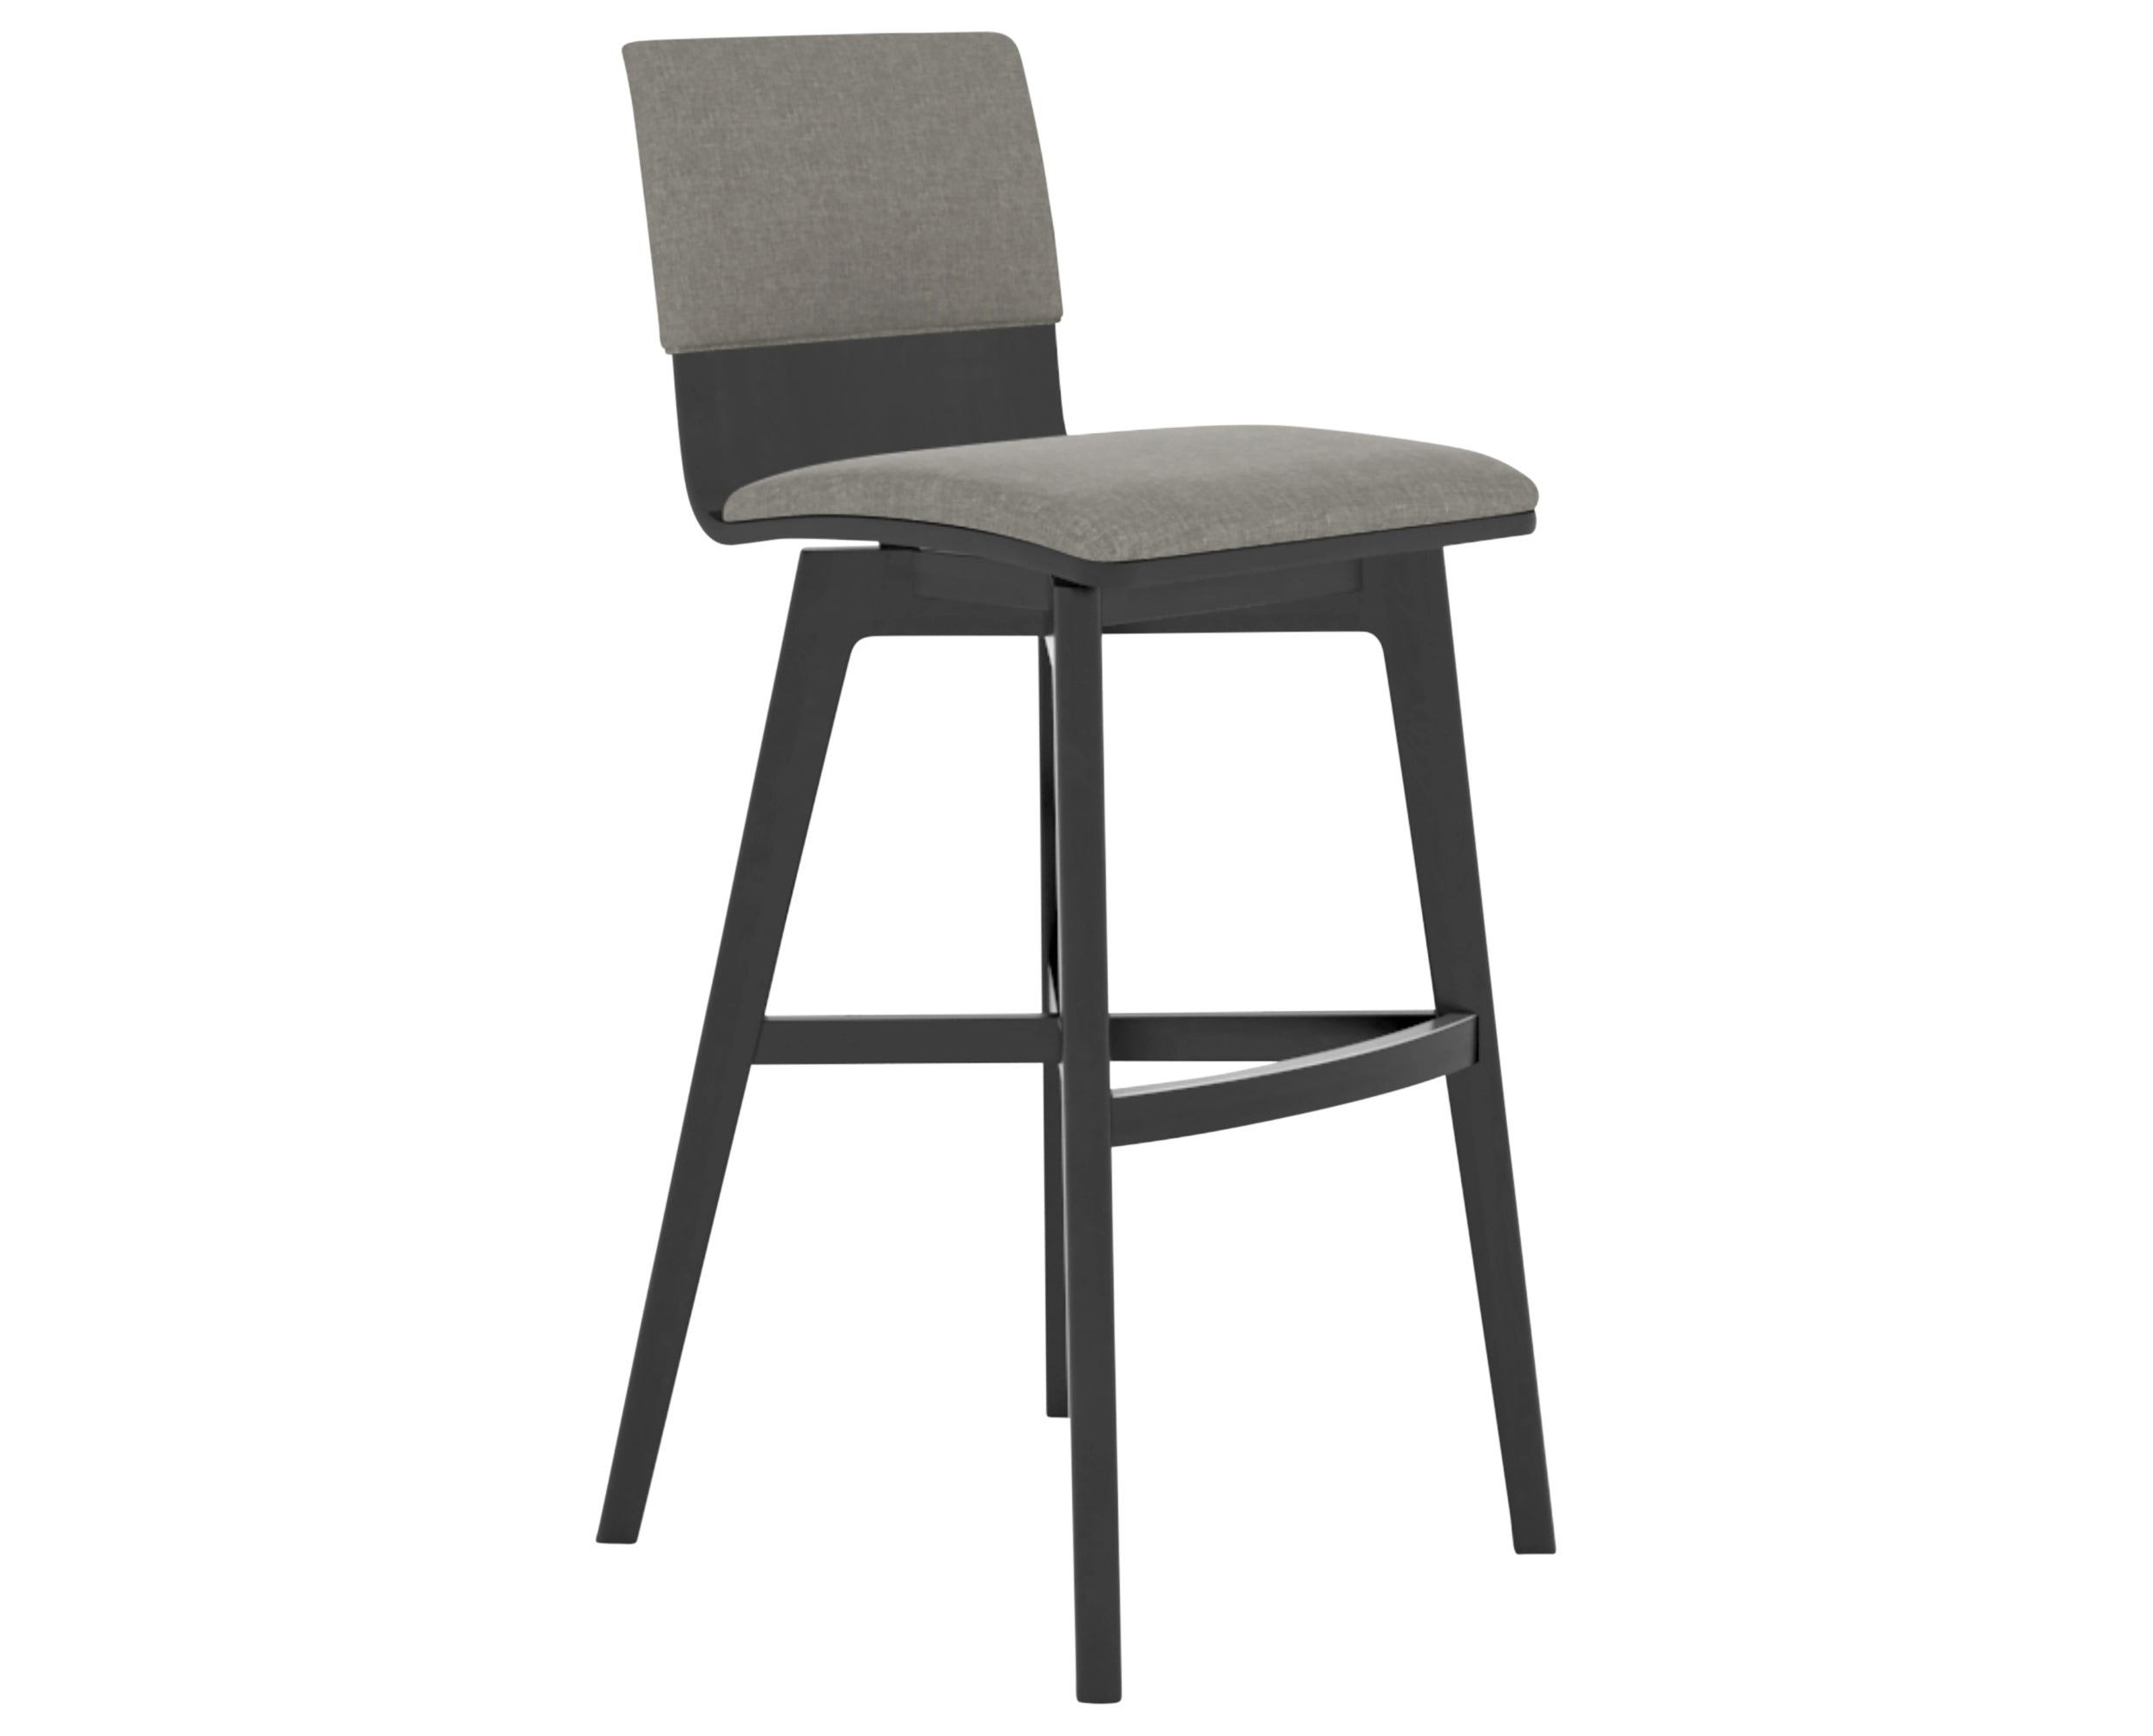 Bar Height | Canadel Downtown Counter Stool 8142 | Valley Ridge Furniture